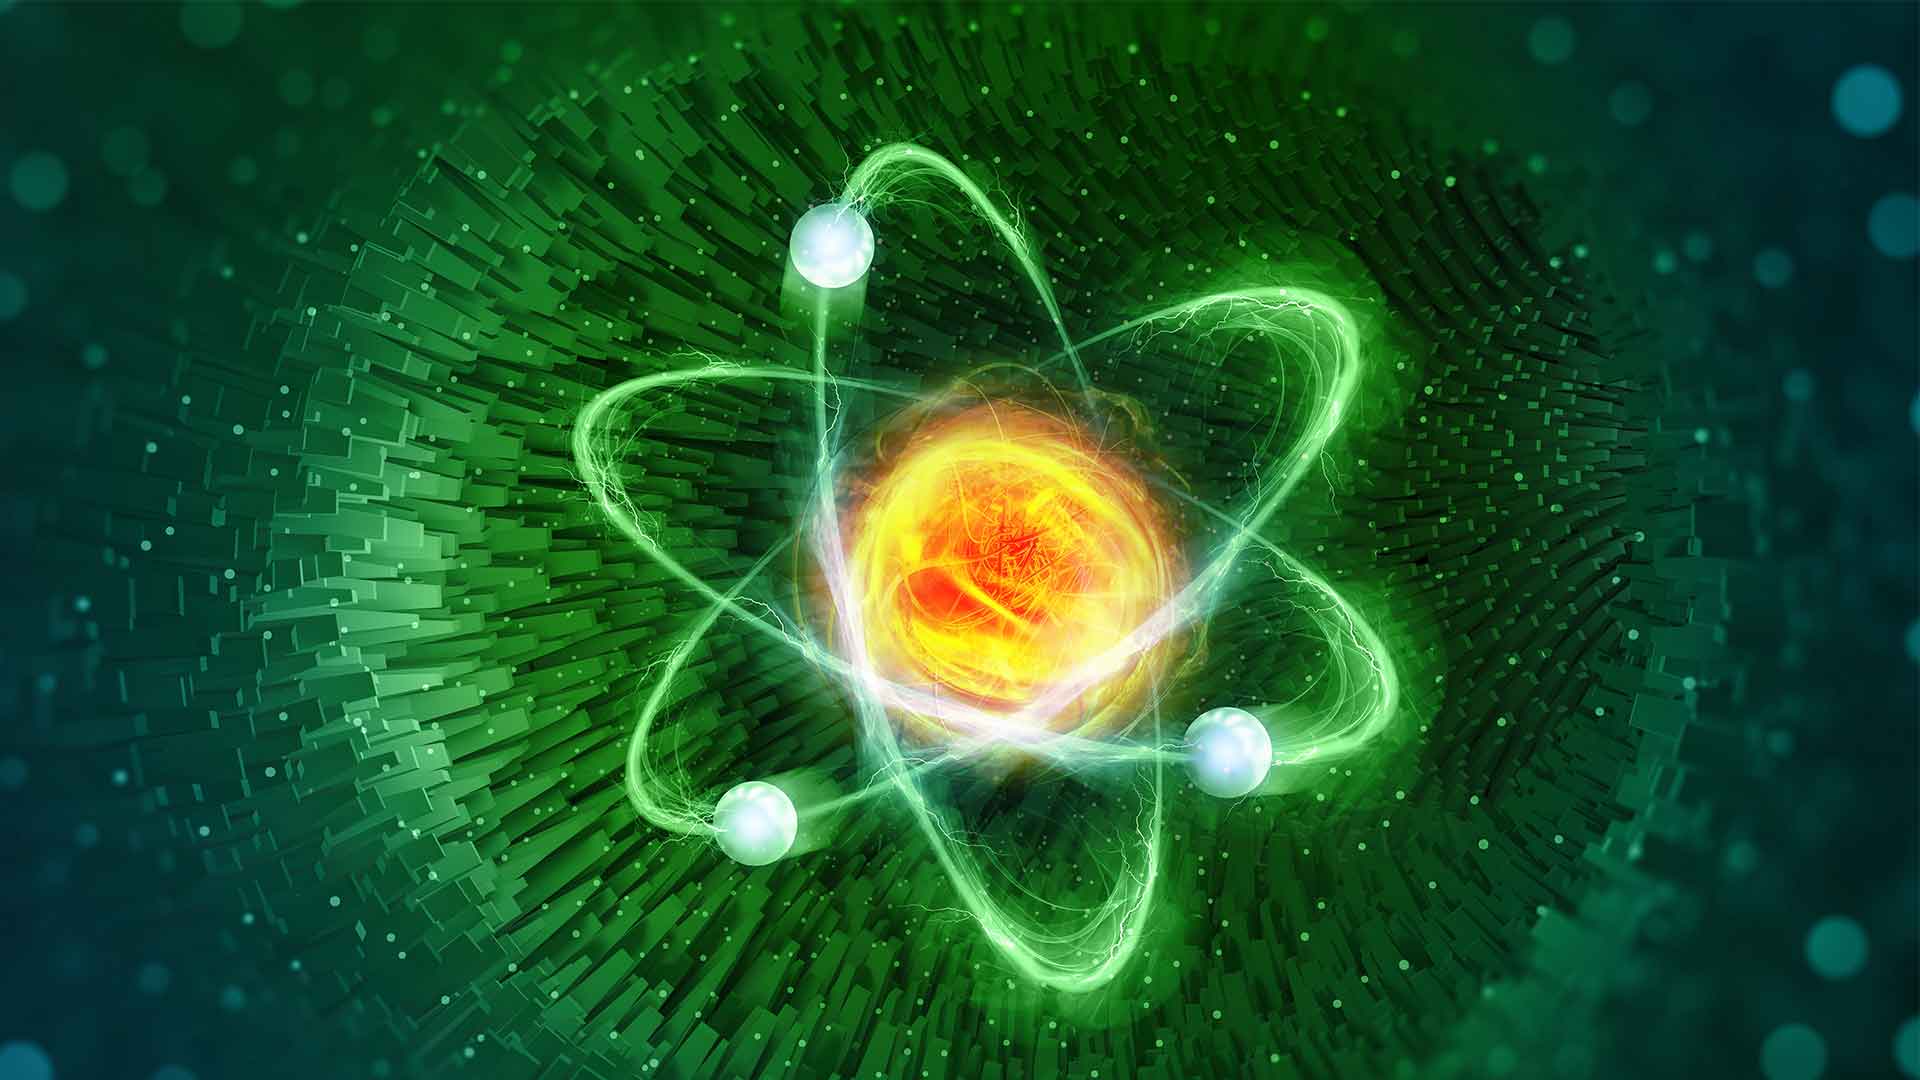 🔭 Are You Intelligent Enough to Pass This Challenging Science Quiz? Let’s Find Out Electron